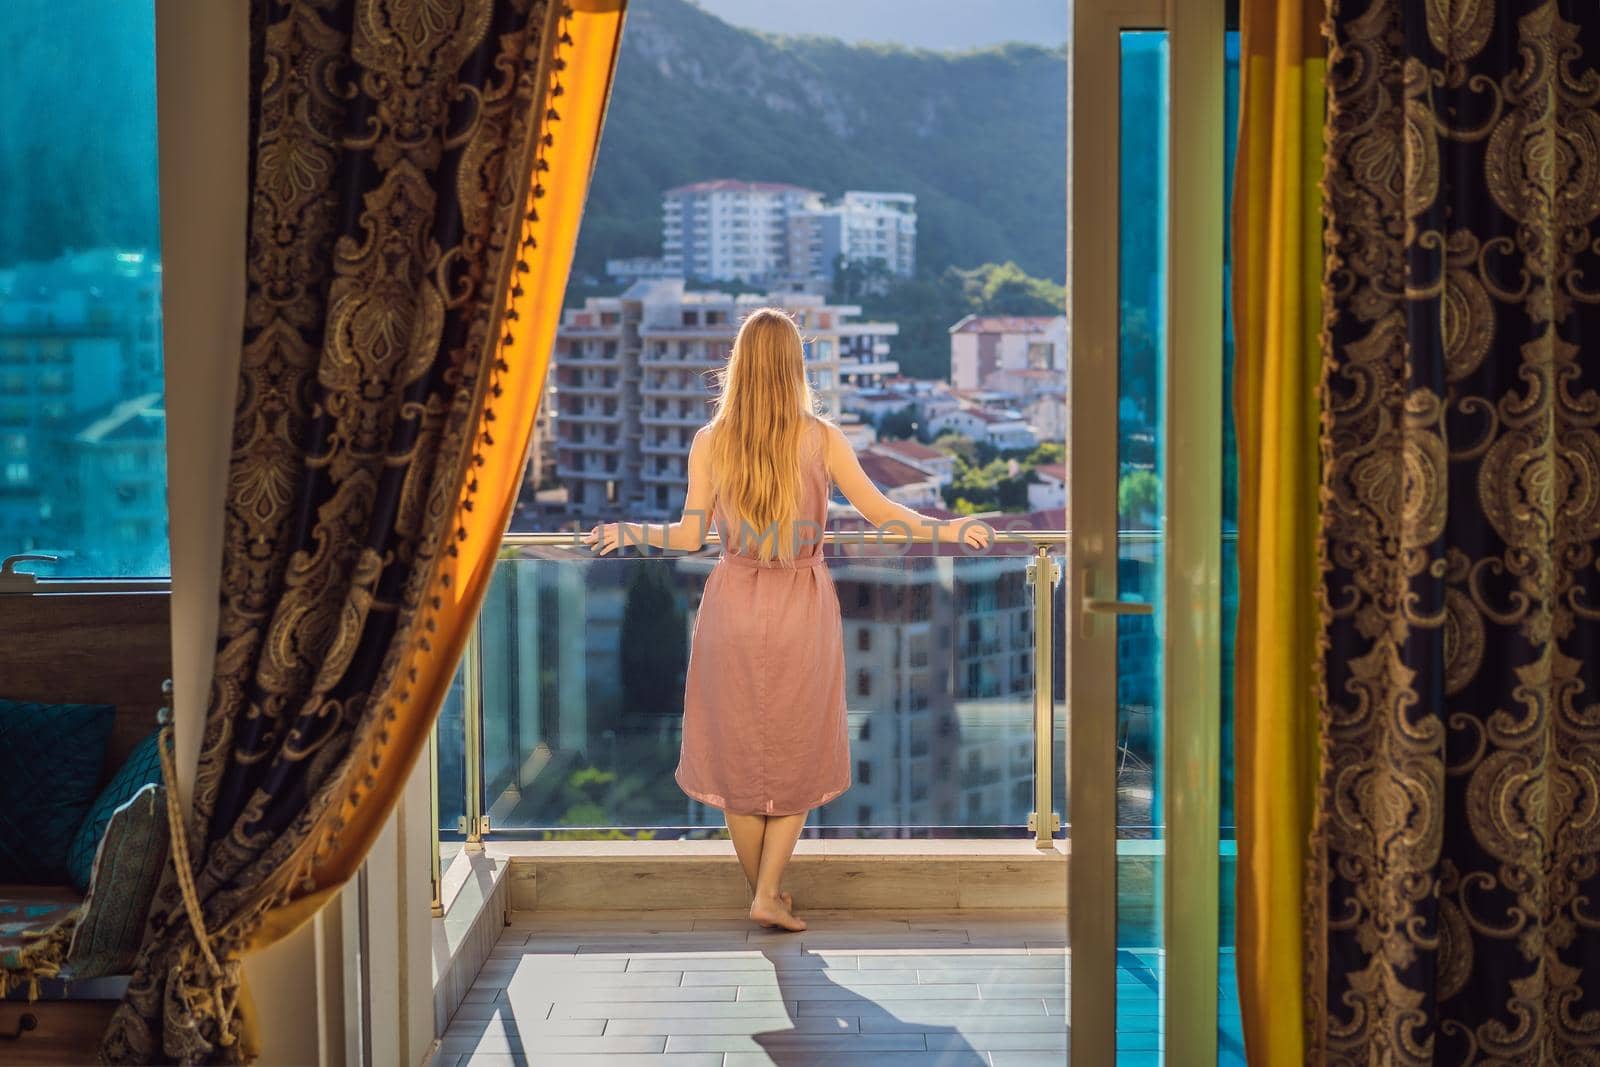 Woman on the balcony against the backdrop of mountains and city, Montenegro. life terrace pretty happiness summer home. Inspiration city romantic hotel.